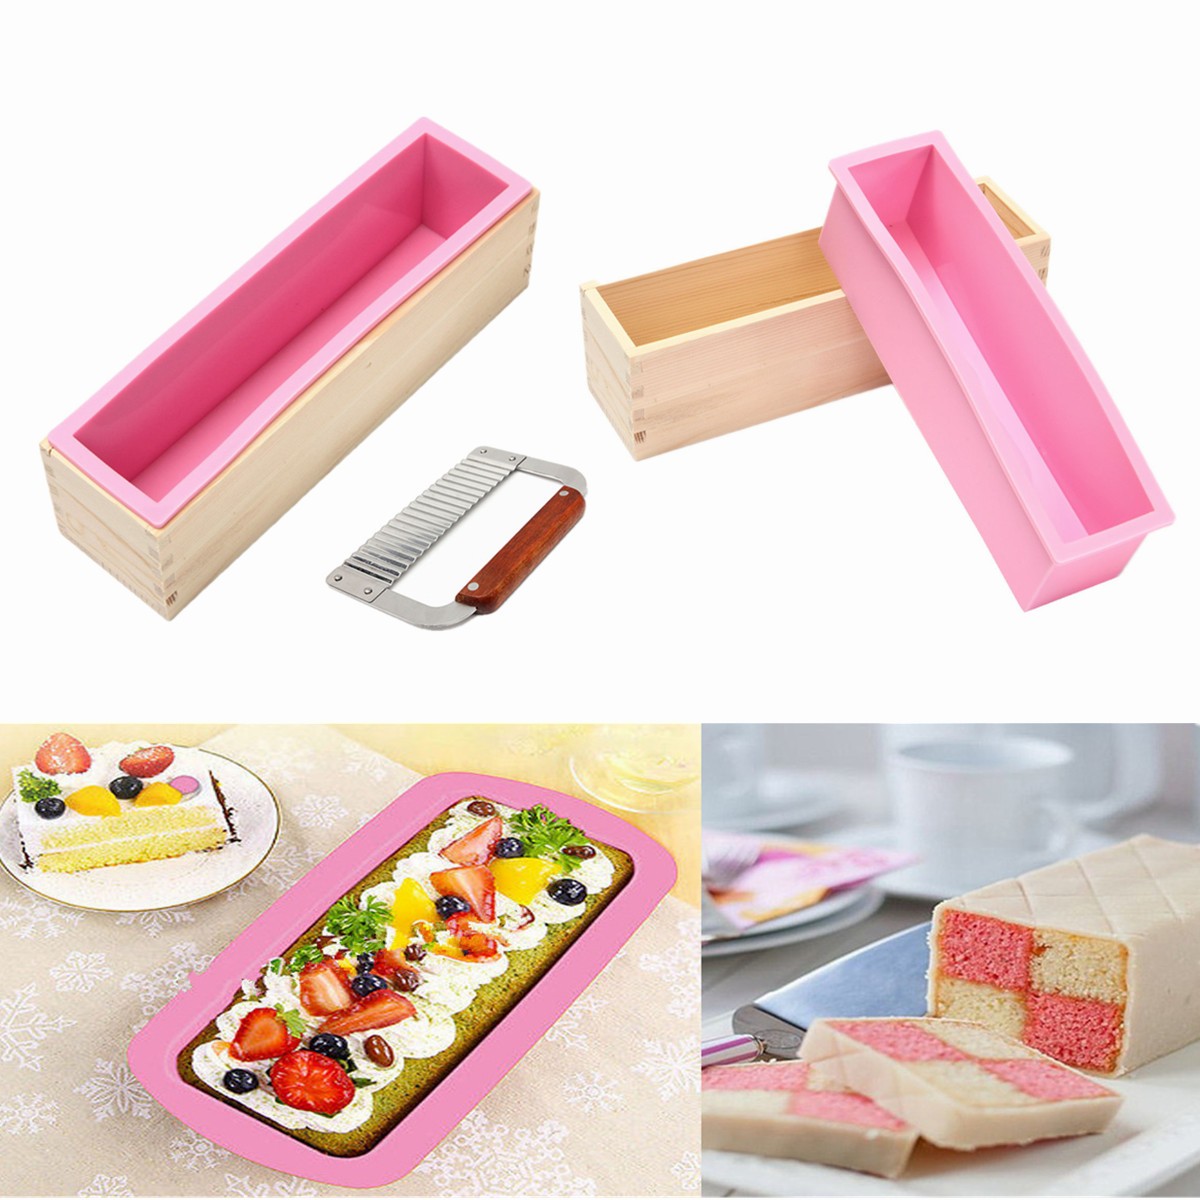 

Wooden Loaf Soap Mould Silicone With Lid Making Baking Tool Cake Biscuit Cutter Baking Mold